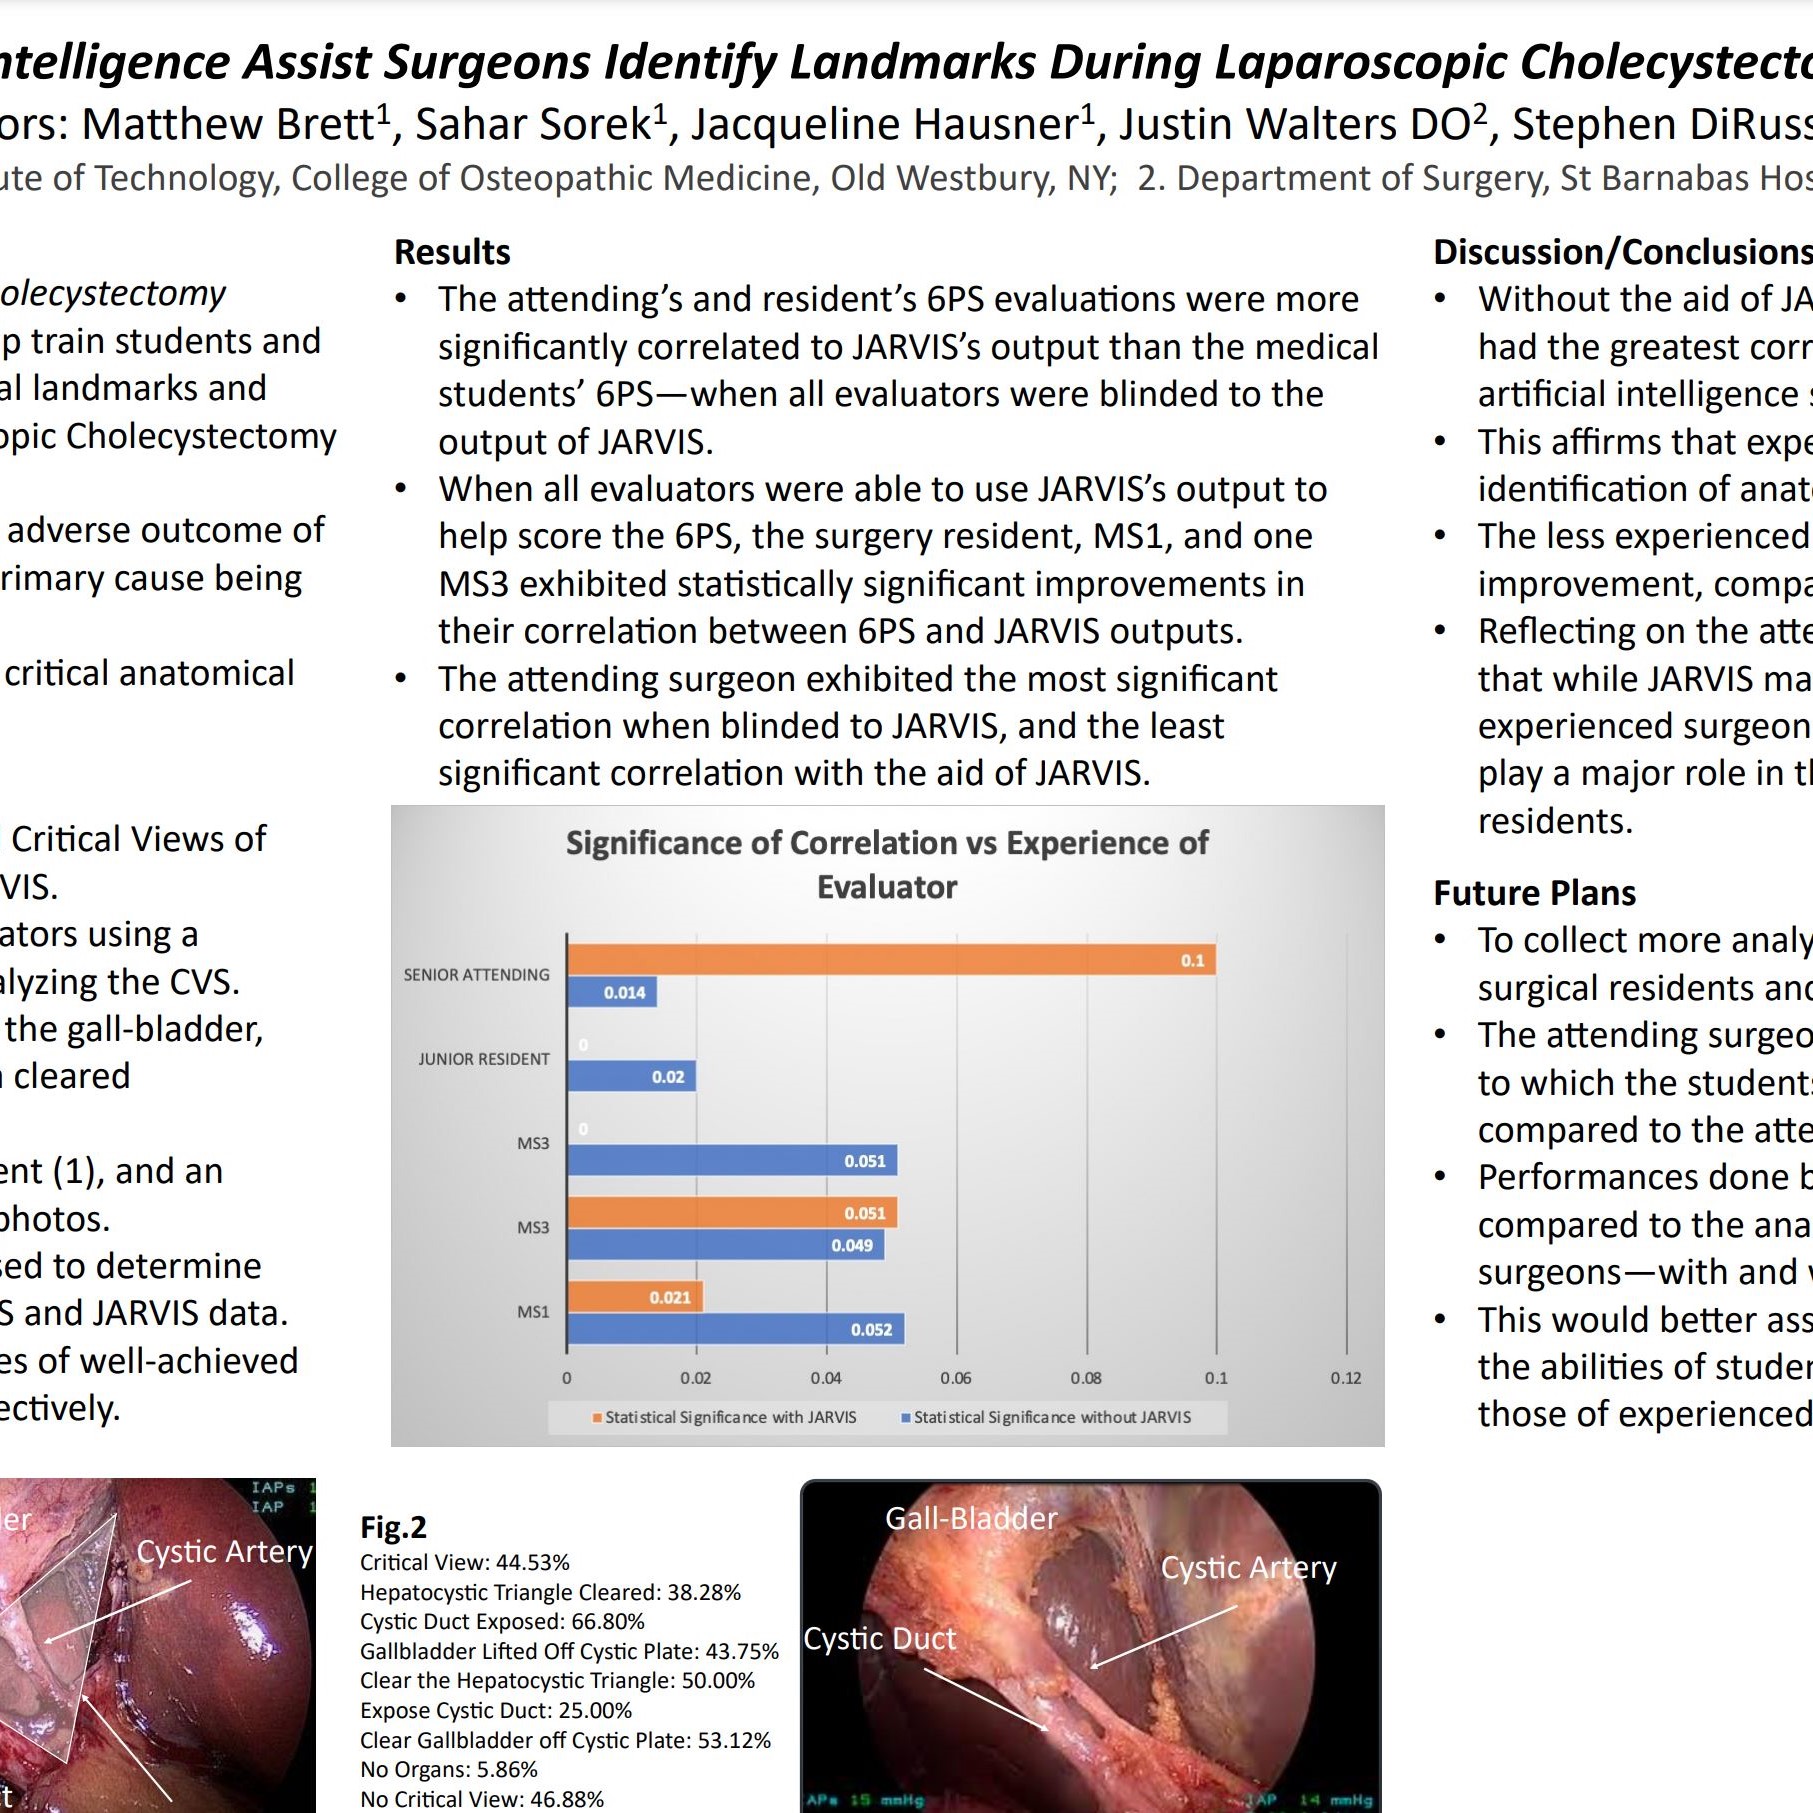 Can Artificial Intelligence Assist Surgeons Identify Landmarks During Laparoscopic Cholecystectomy Surgery?